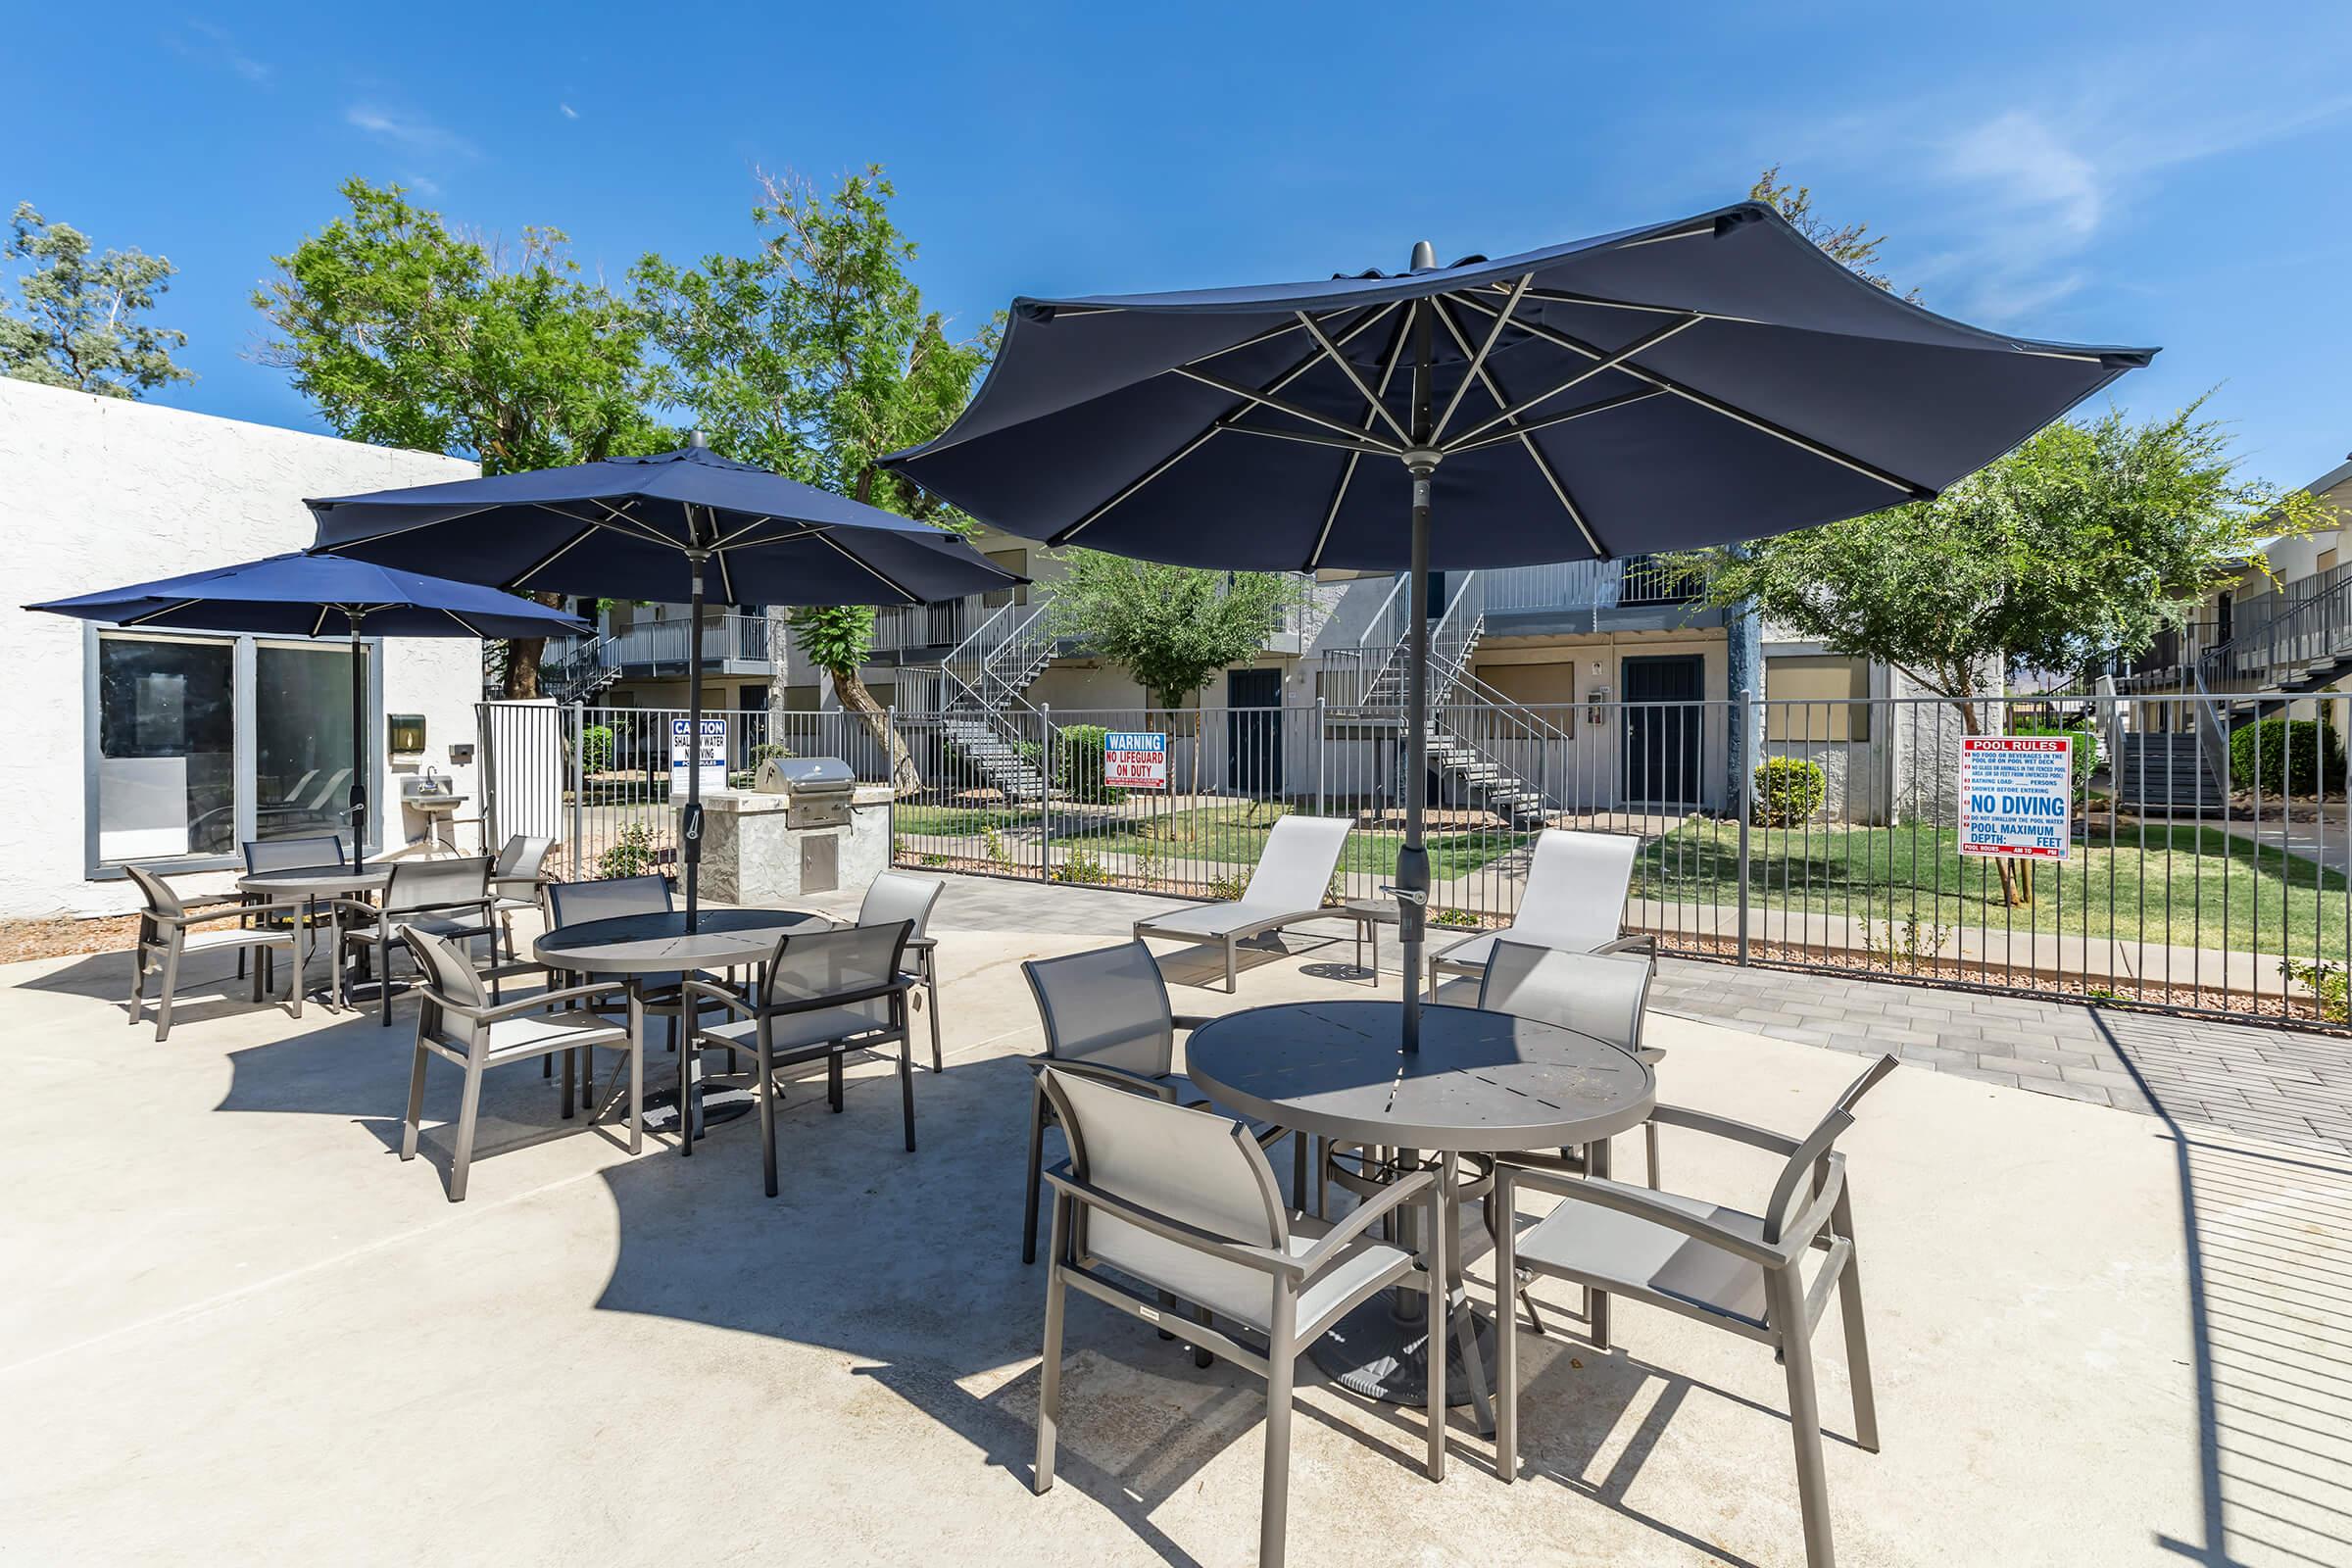 Outdoor dining patio sets with large dark blue umbrellas providing shade